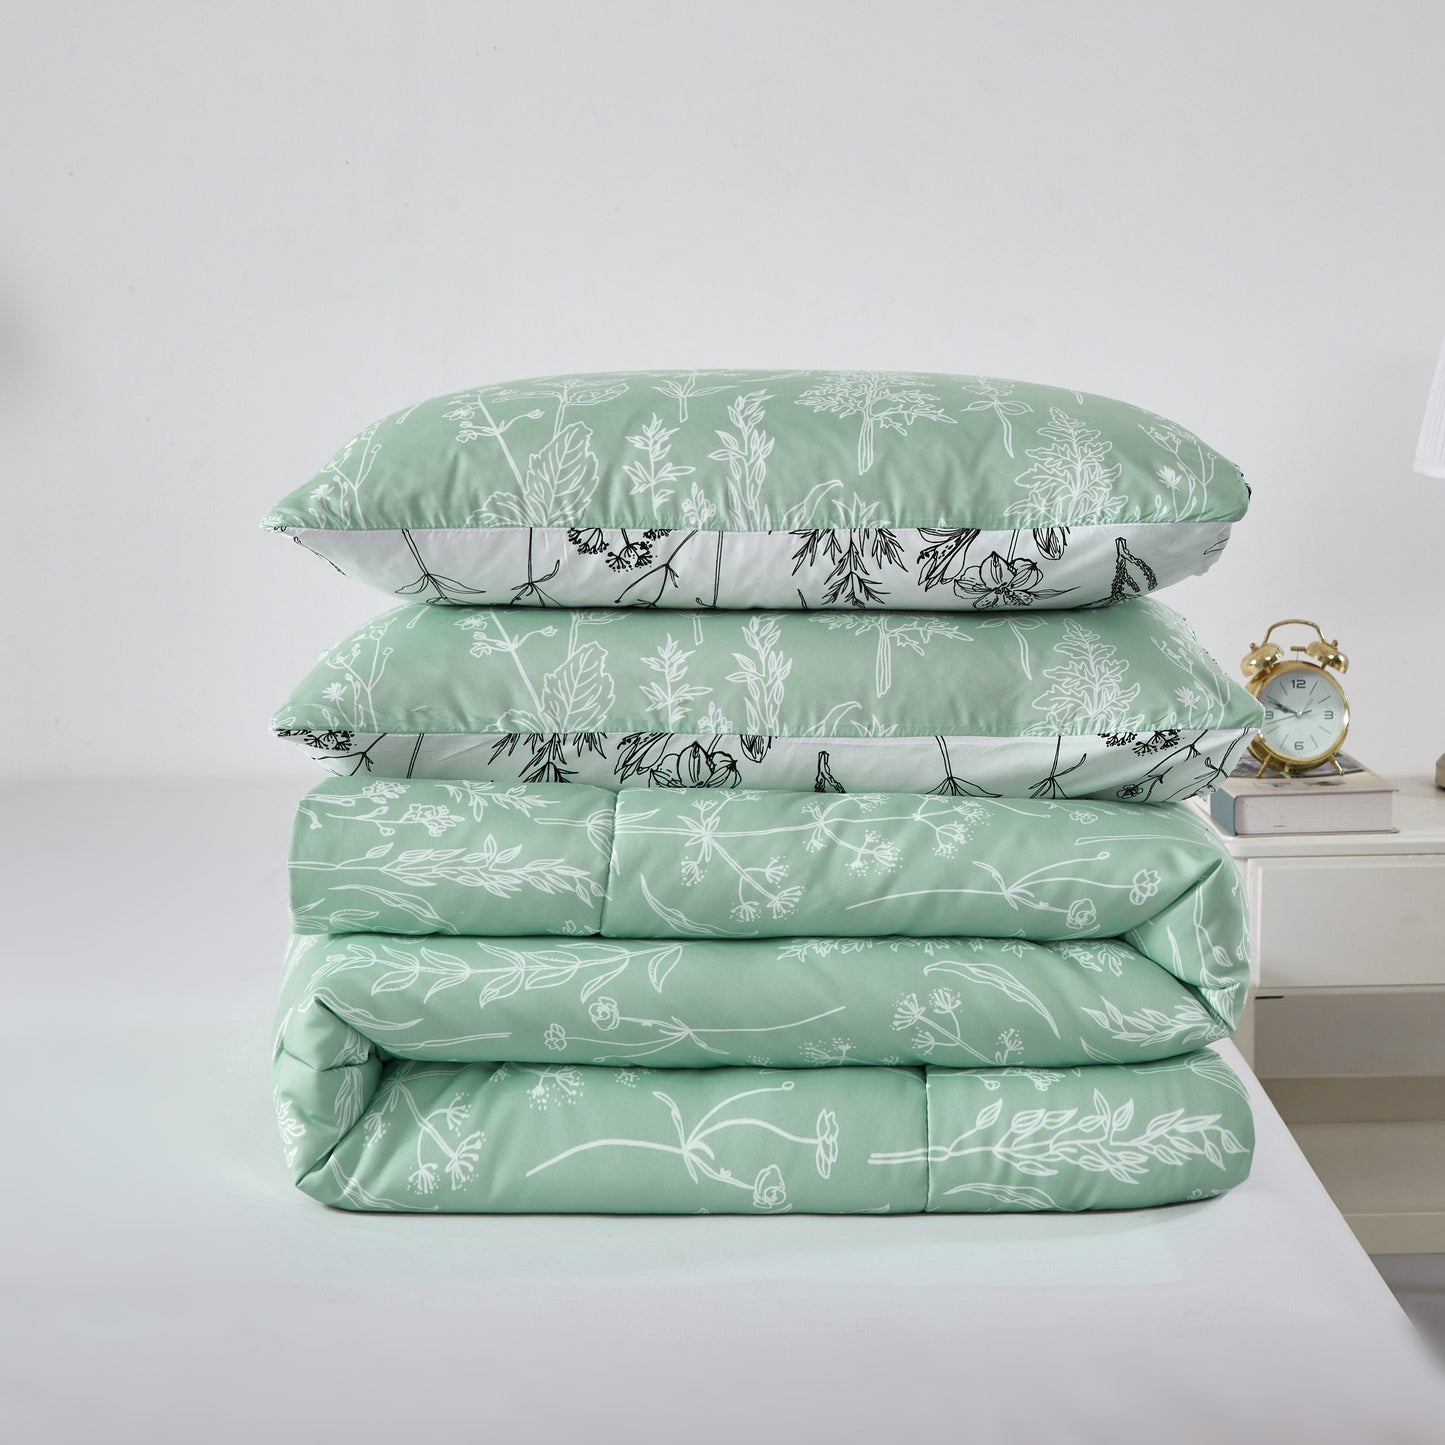 Green and White Reversible Floral Sage Green Comforter Set 3 Pieces Flowers Plants Bed Set with 2 Pillow Shams